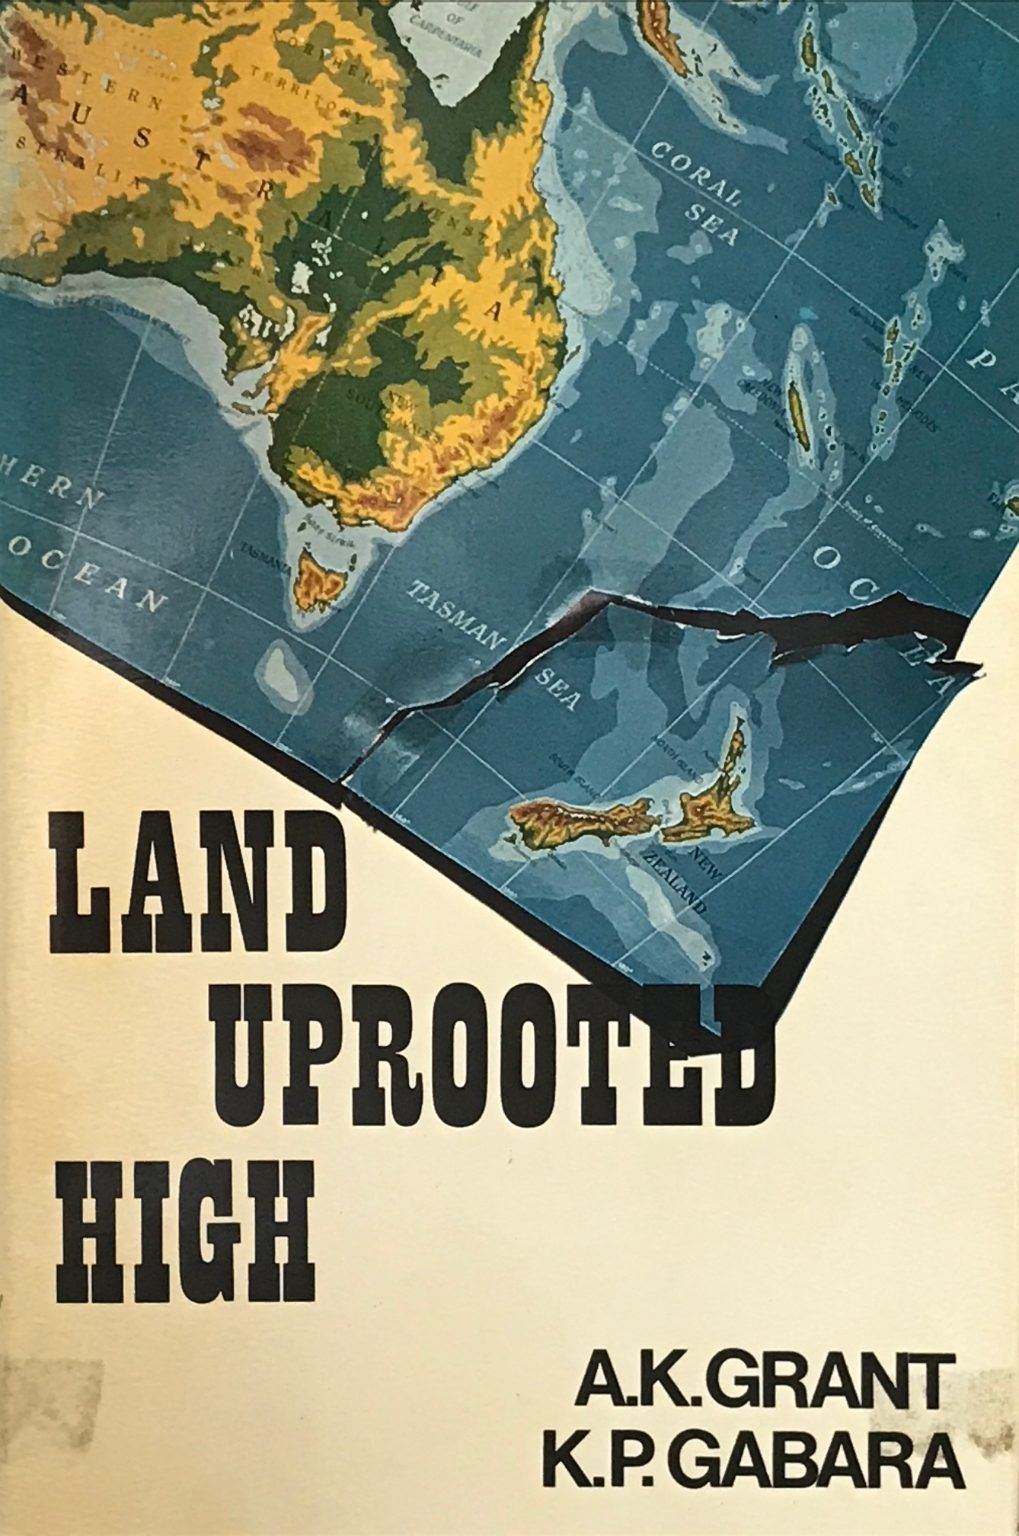 LAND UPROOTED HIGH